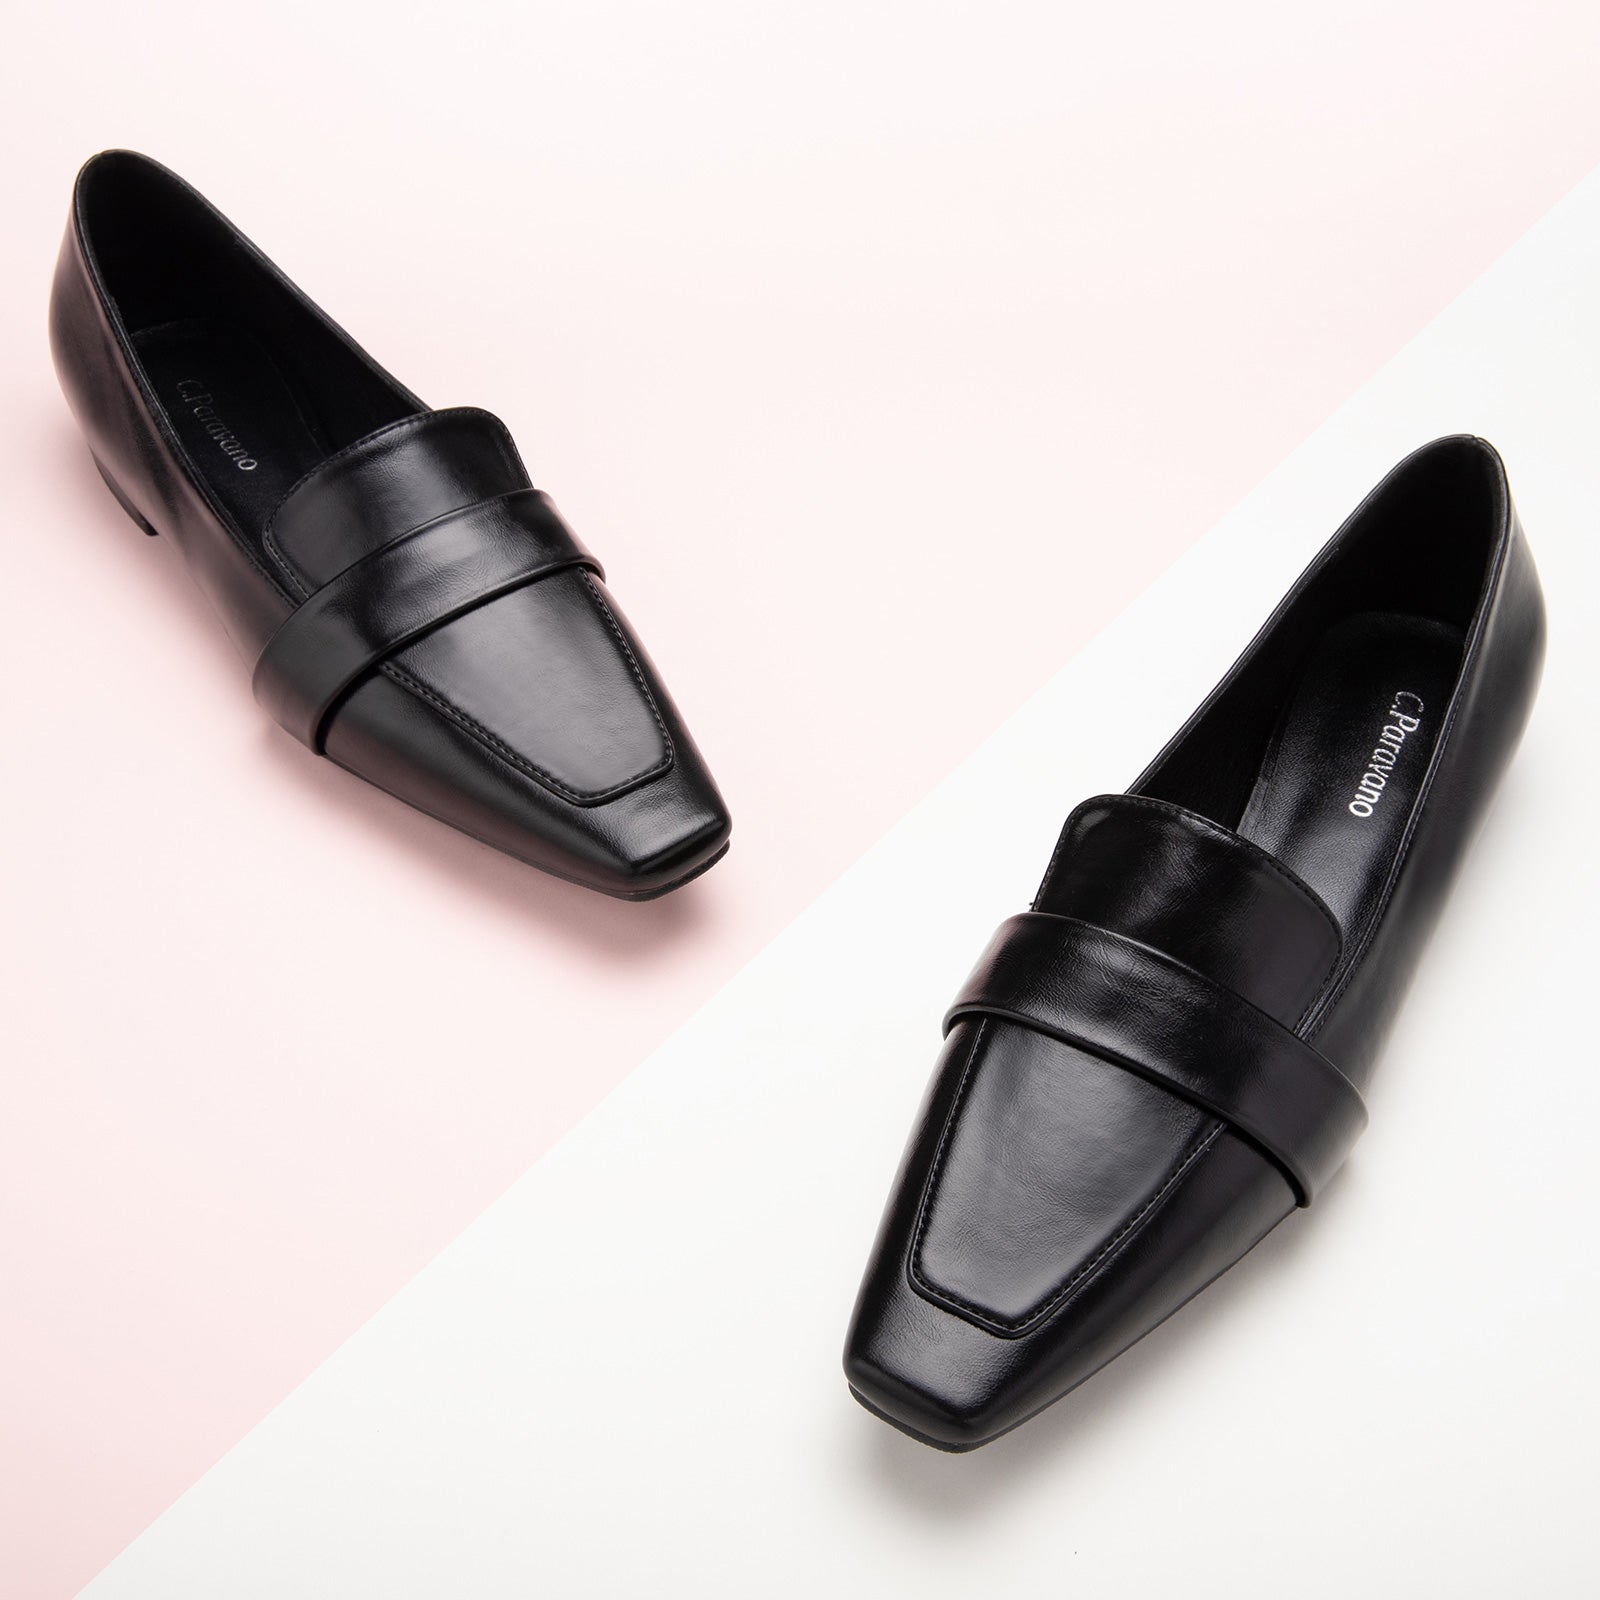  Black Platform Loafers with Penny Strap, perfect for a confident and fashionable look in any urban setting